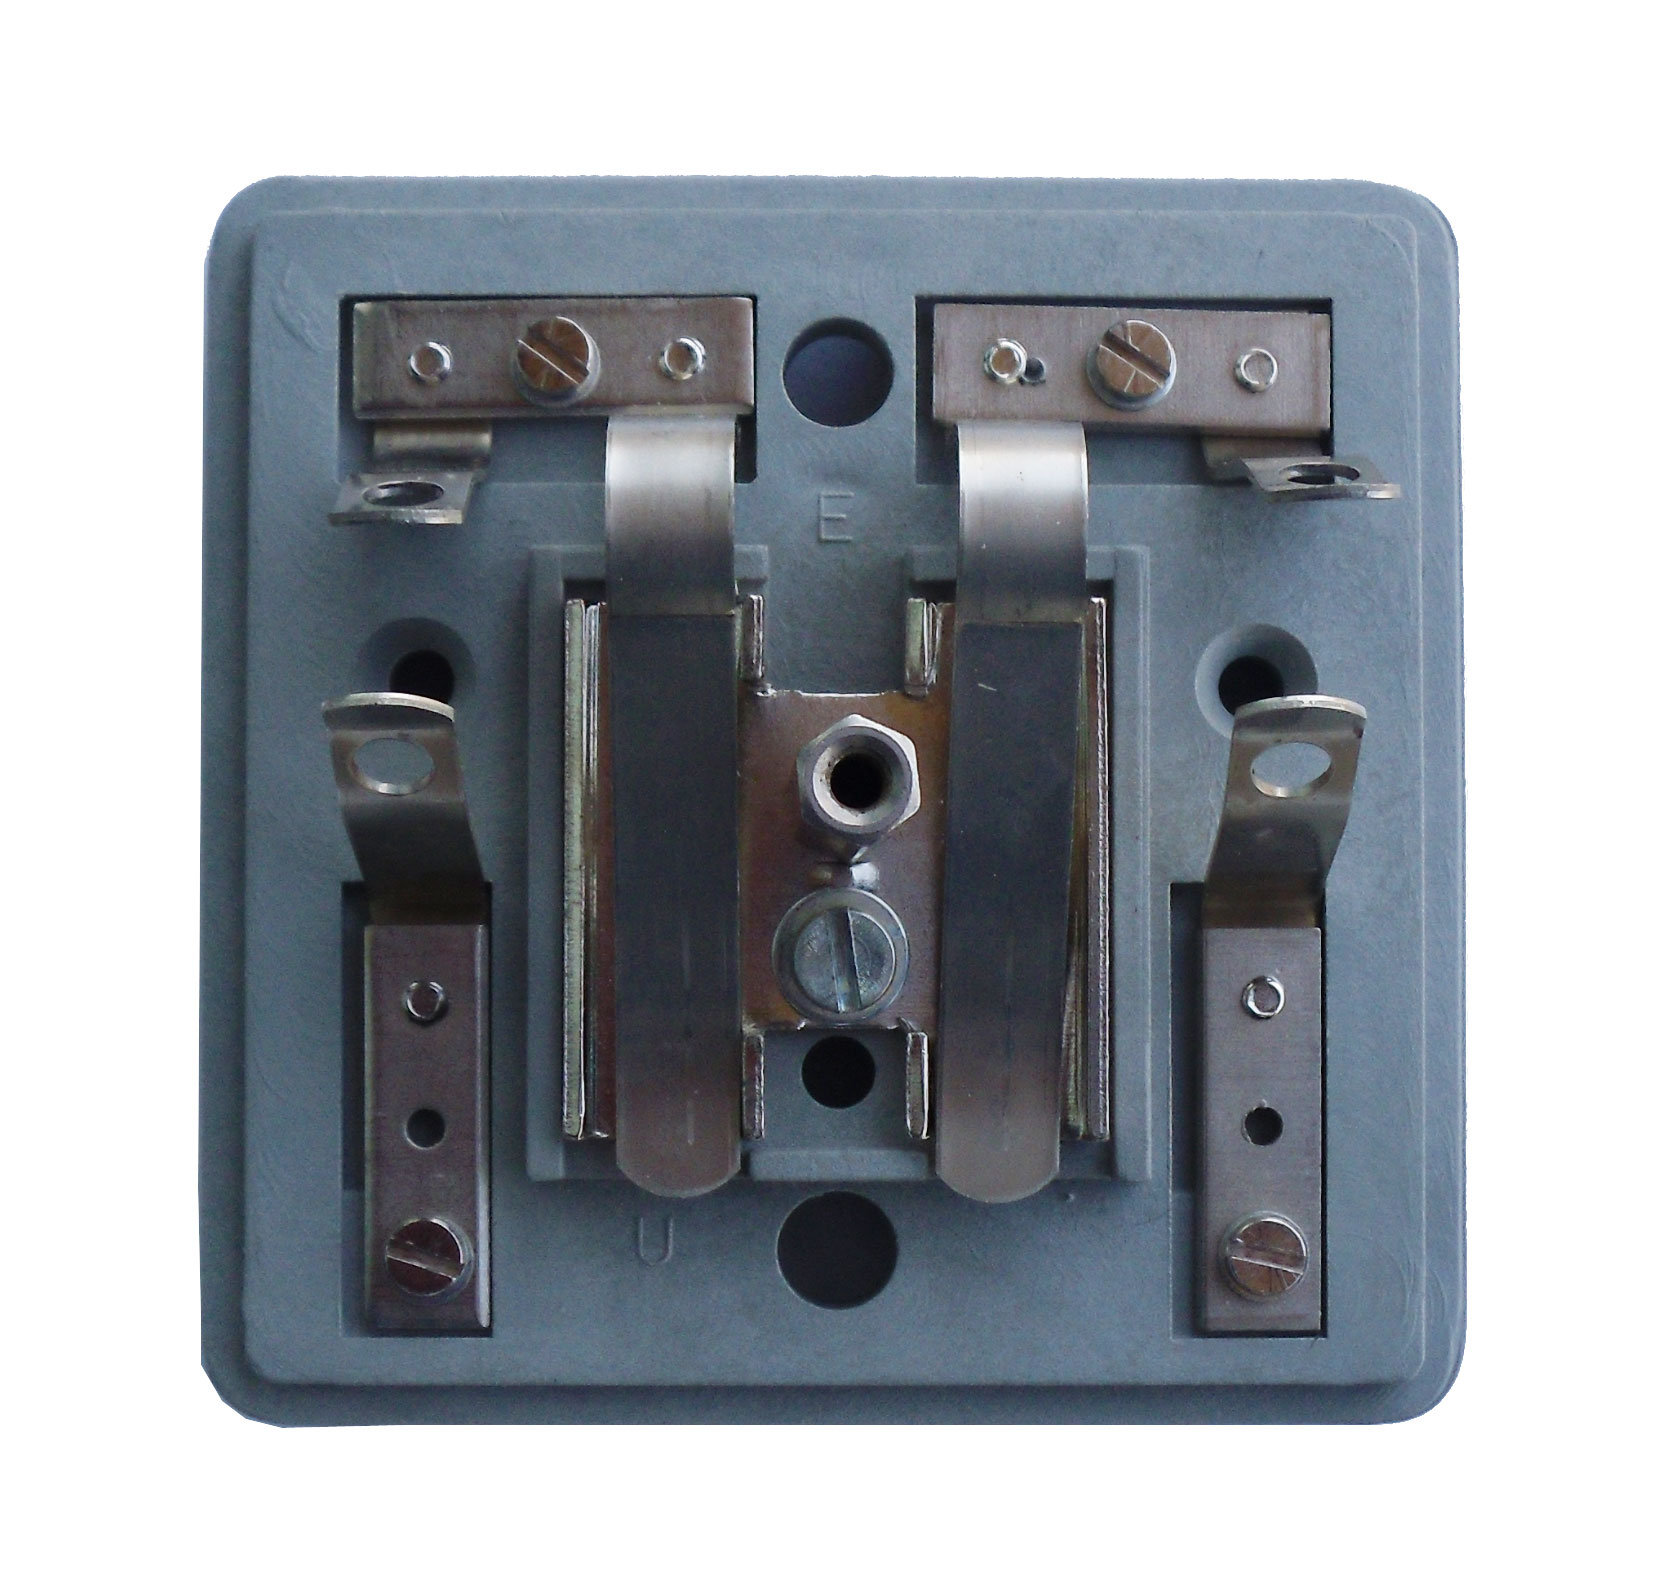 Unified telephone line protector L475 